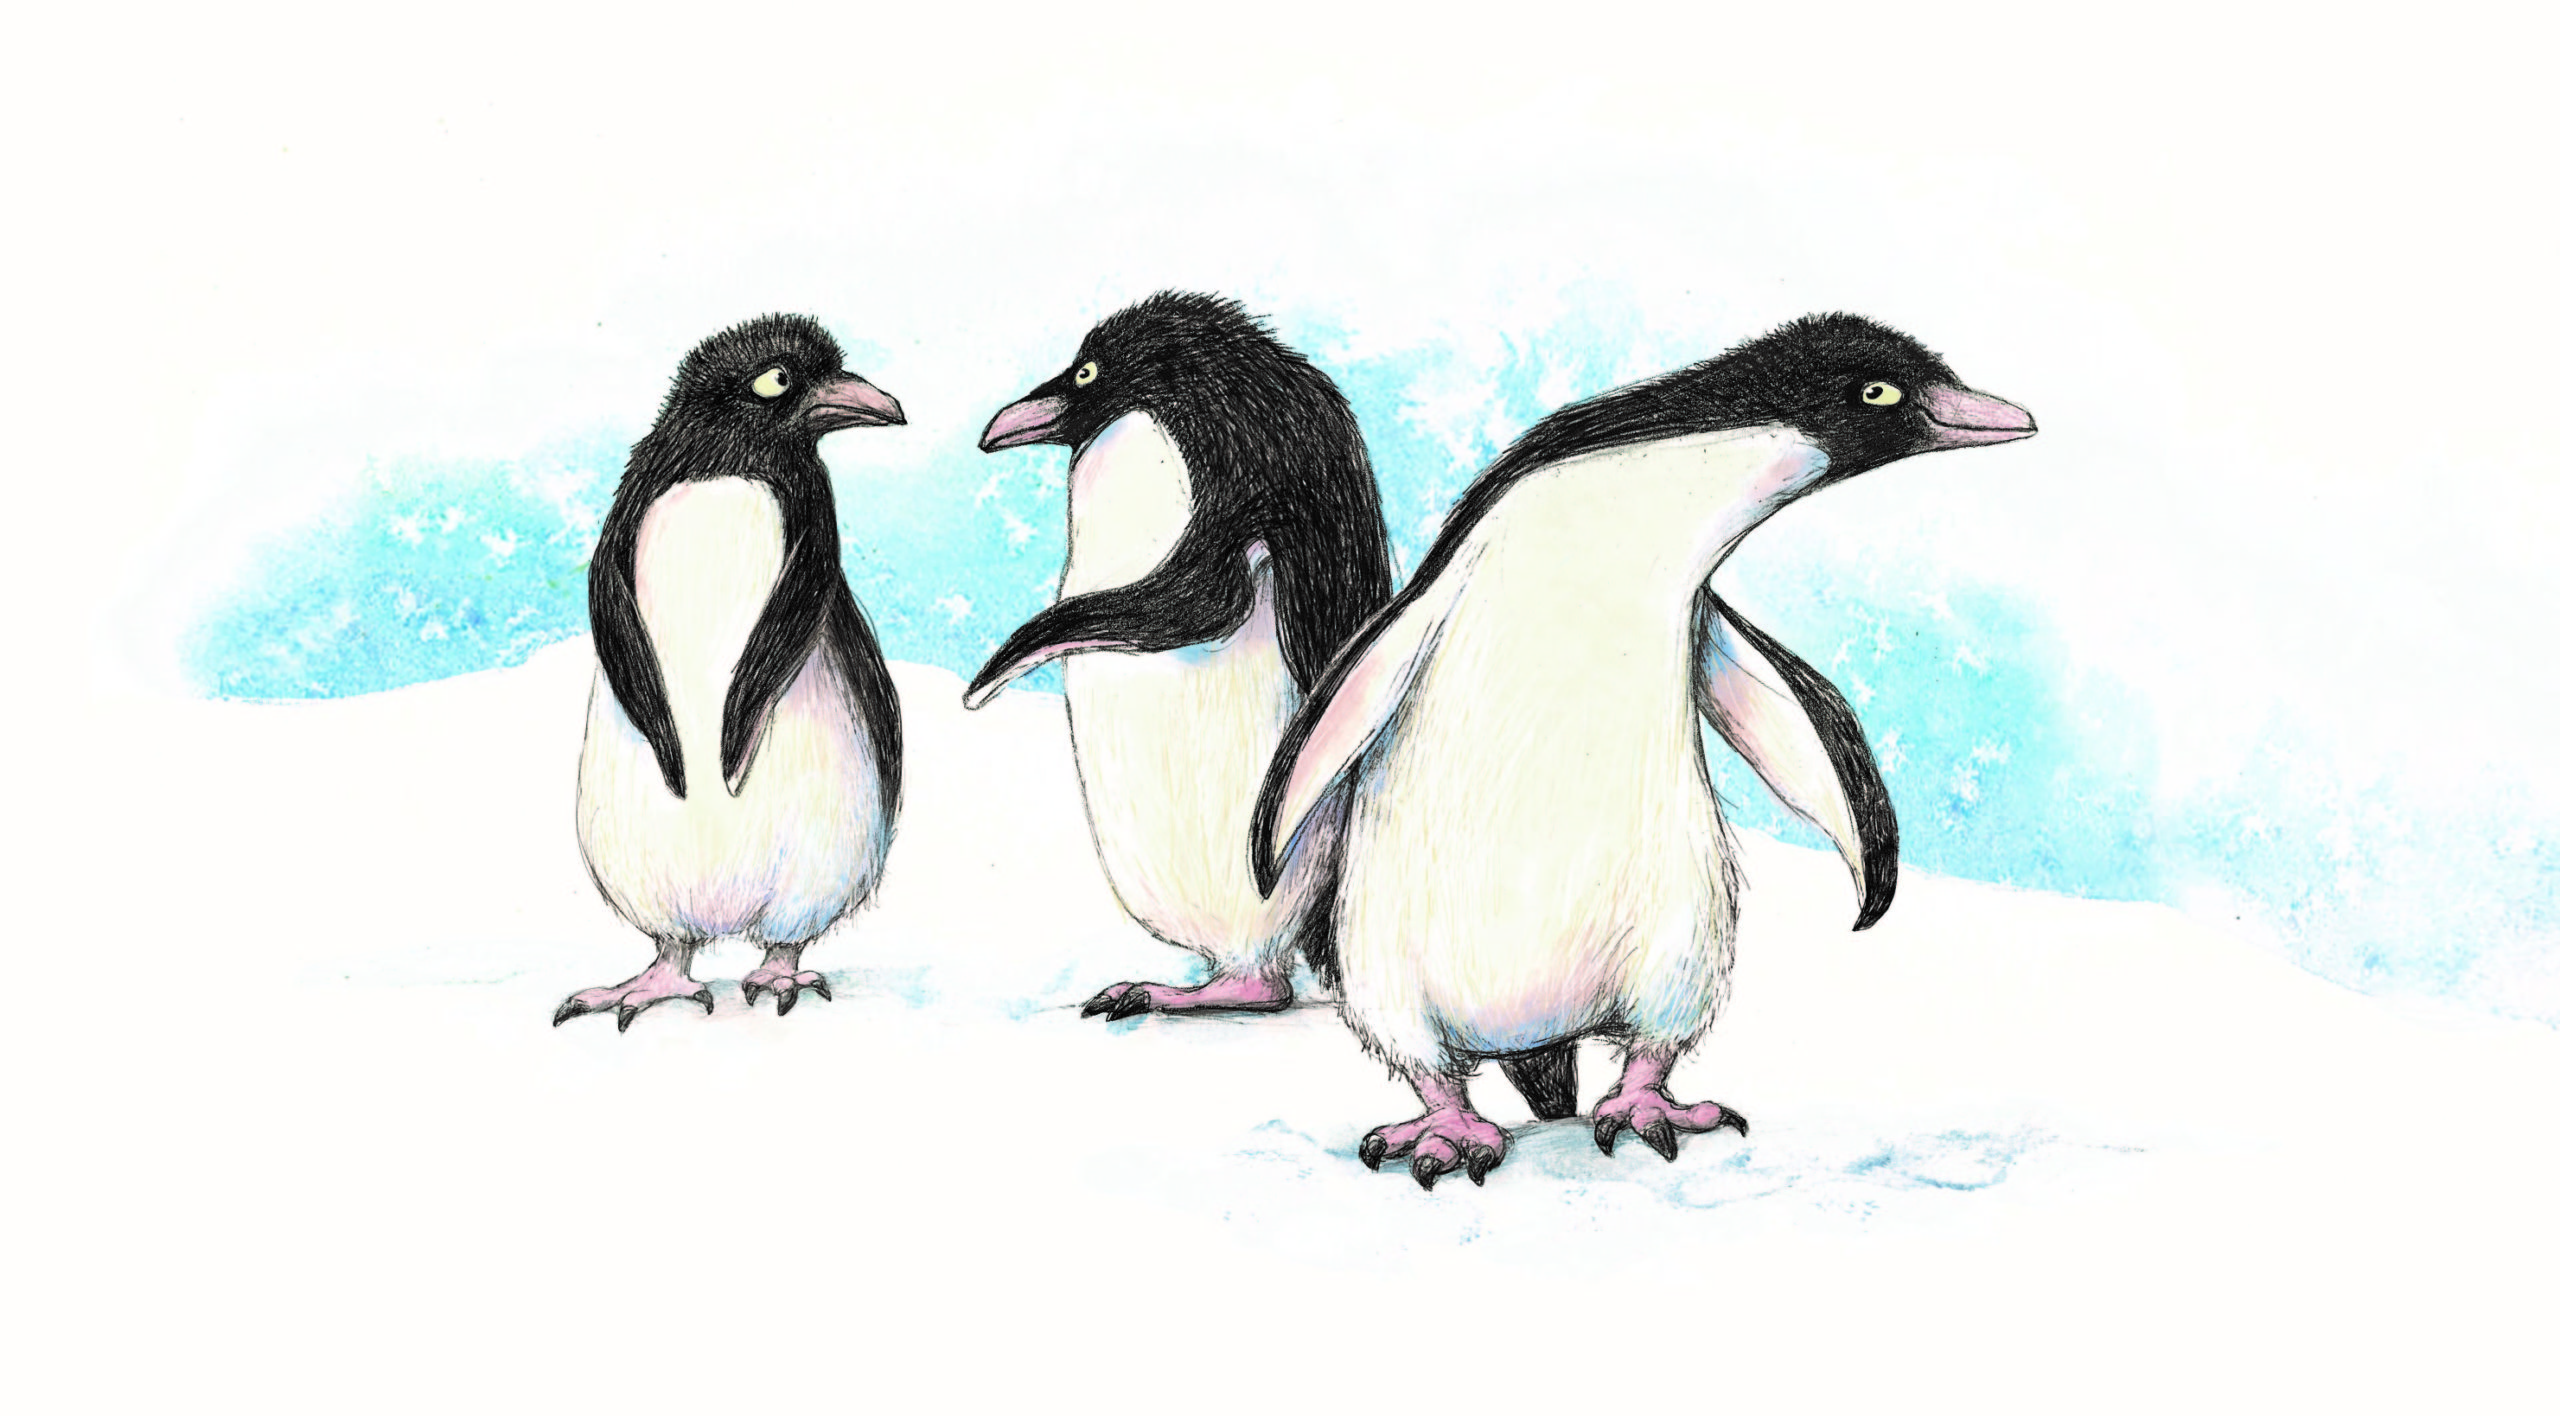 Art from the title spread of Dig, Dance, Dive showing three penguins